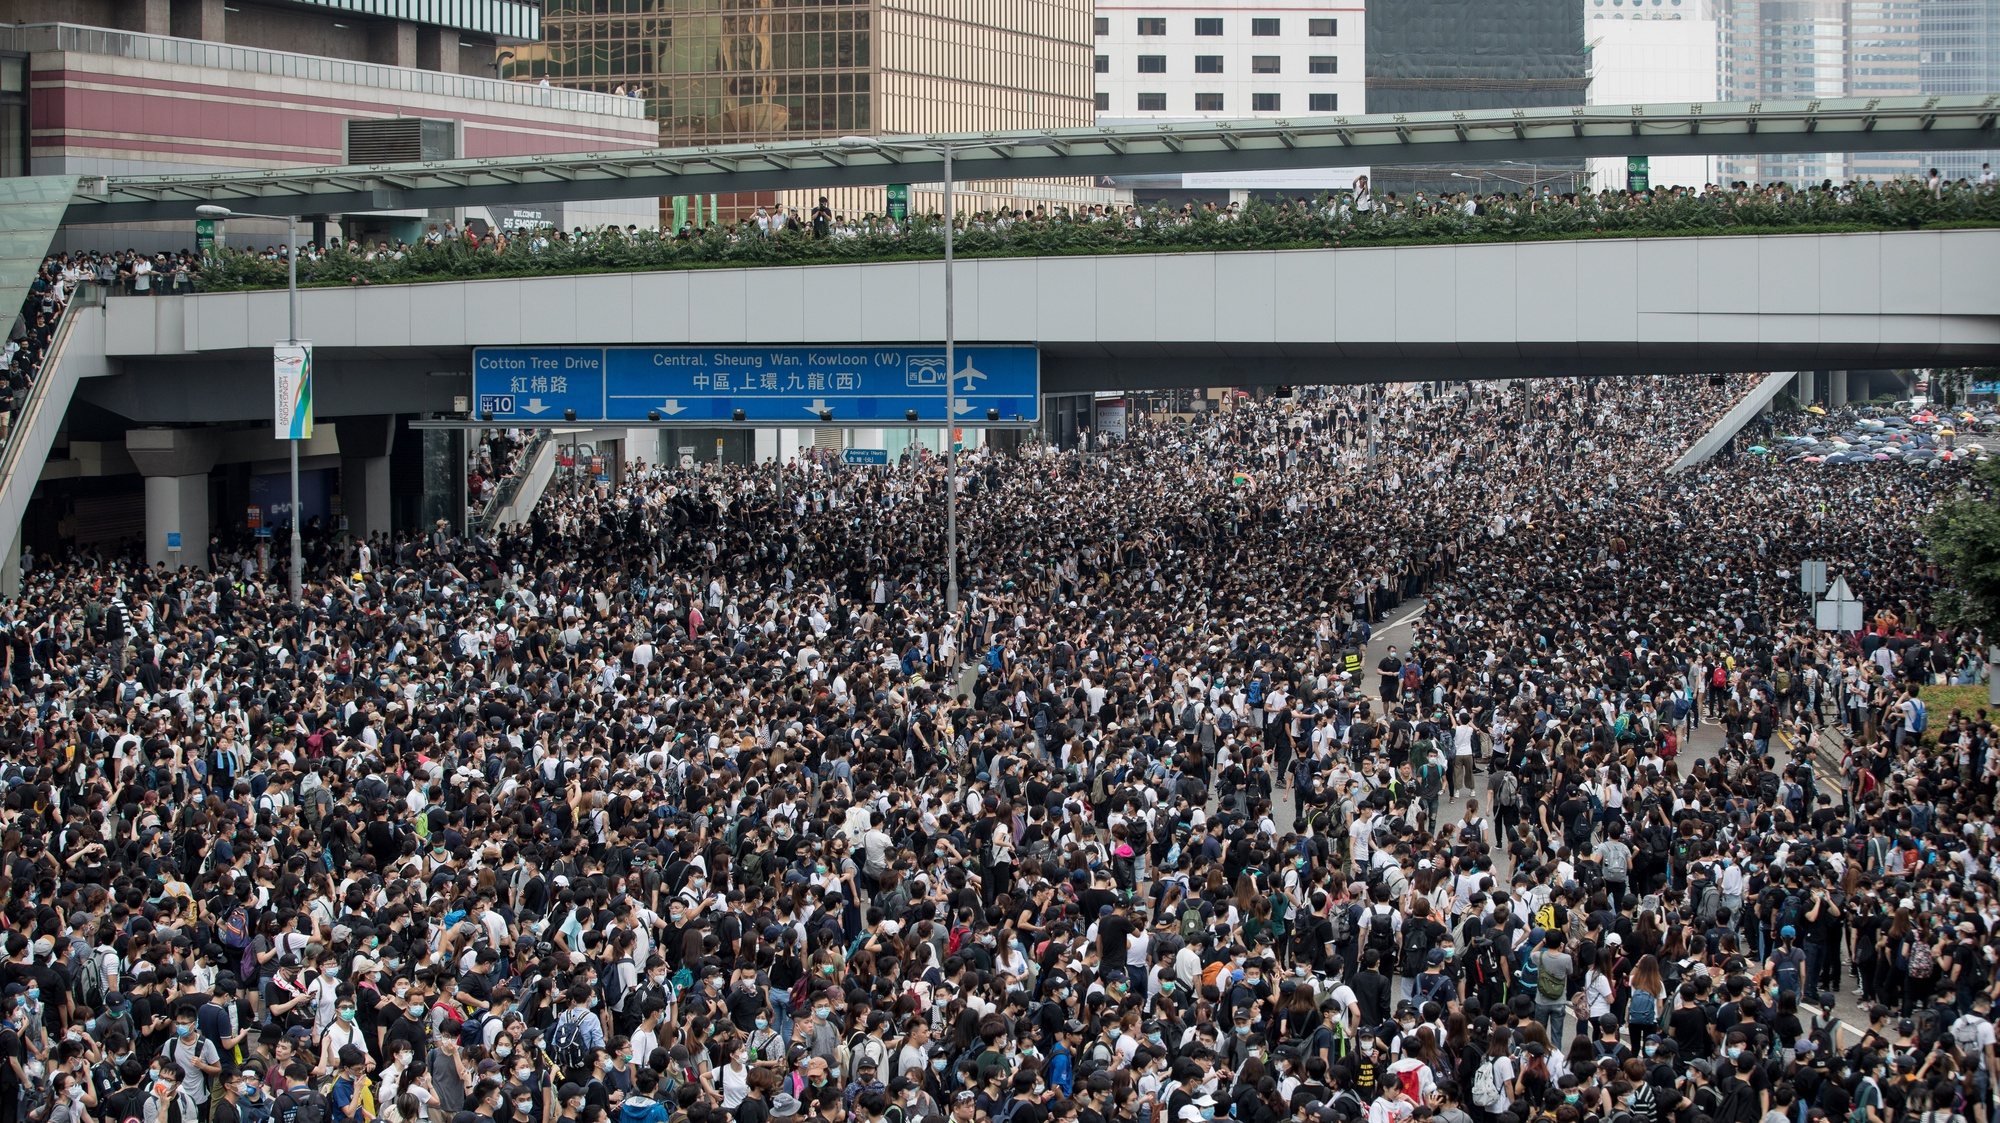 epa09261432 (FILE) Protesters take part in a rally against an extradition bill outside the Legislative Council in Hong Kong, China, 12 June 2019 (reissued 11 June 2021). June 12 marks the second anniversary of the protest movement against the bill which faced immense opposition and would allow the transfer of fugitives to jurisdictions which Hong Kong does not have a treaty with, including mainland China.  EPA/JEROME FAVRE *** Local Caption *** 55267110